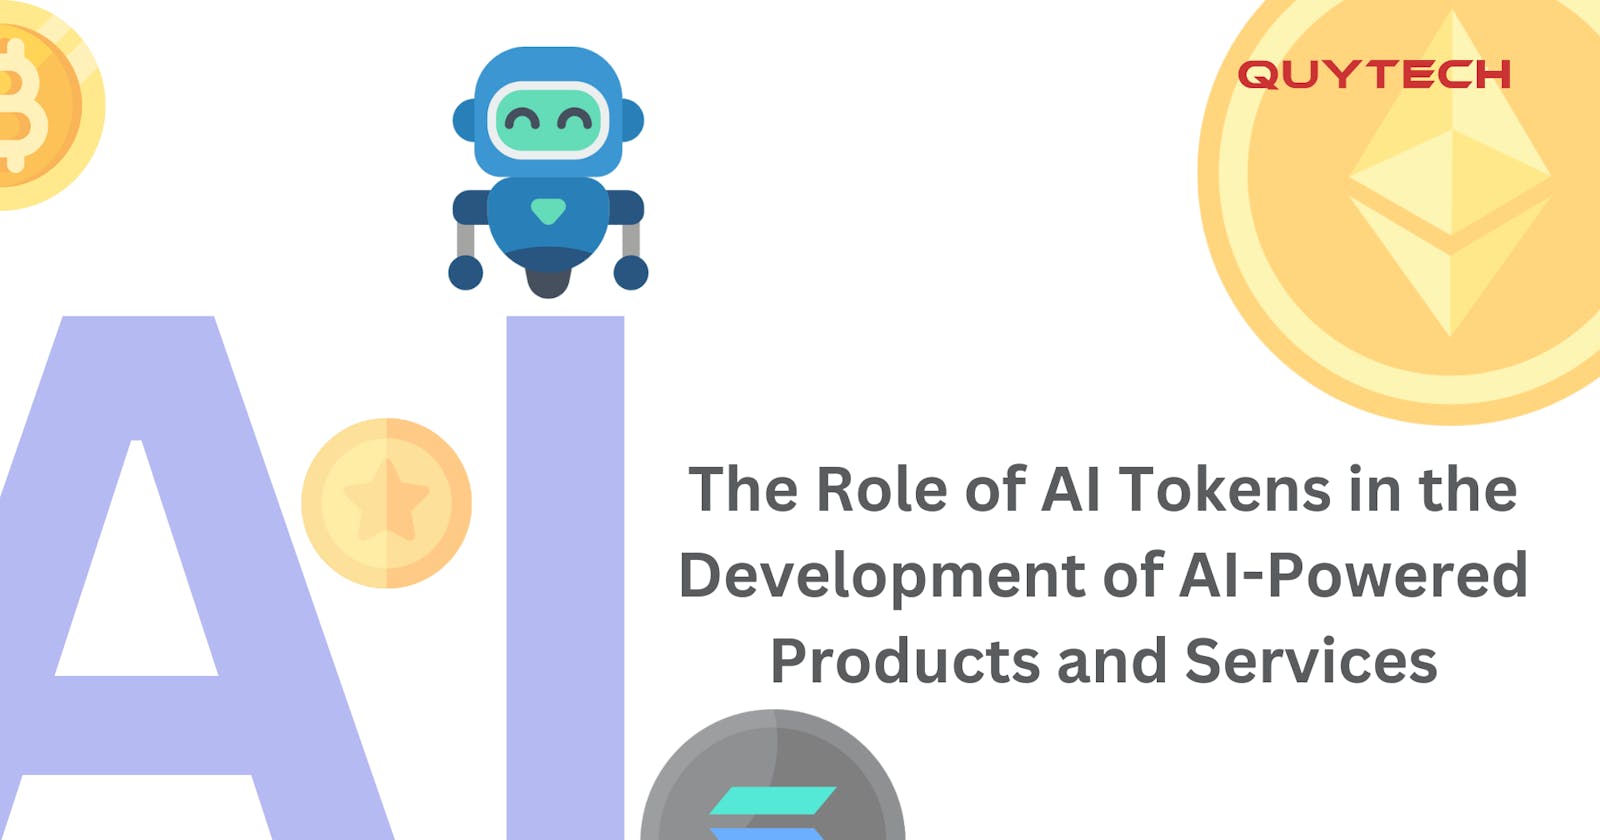 The Role of AI Tokens in the Development of AI-Powered Products and Services